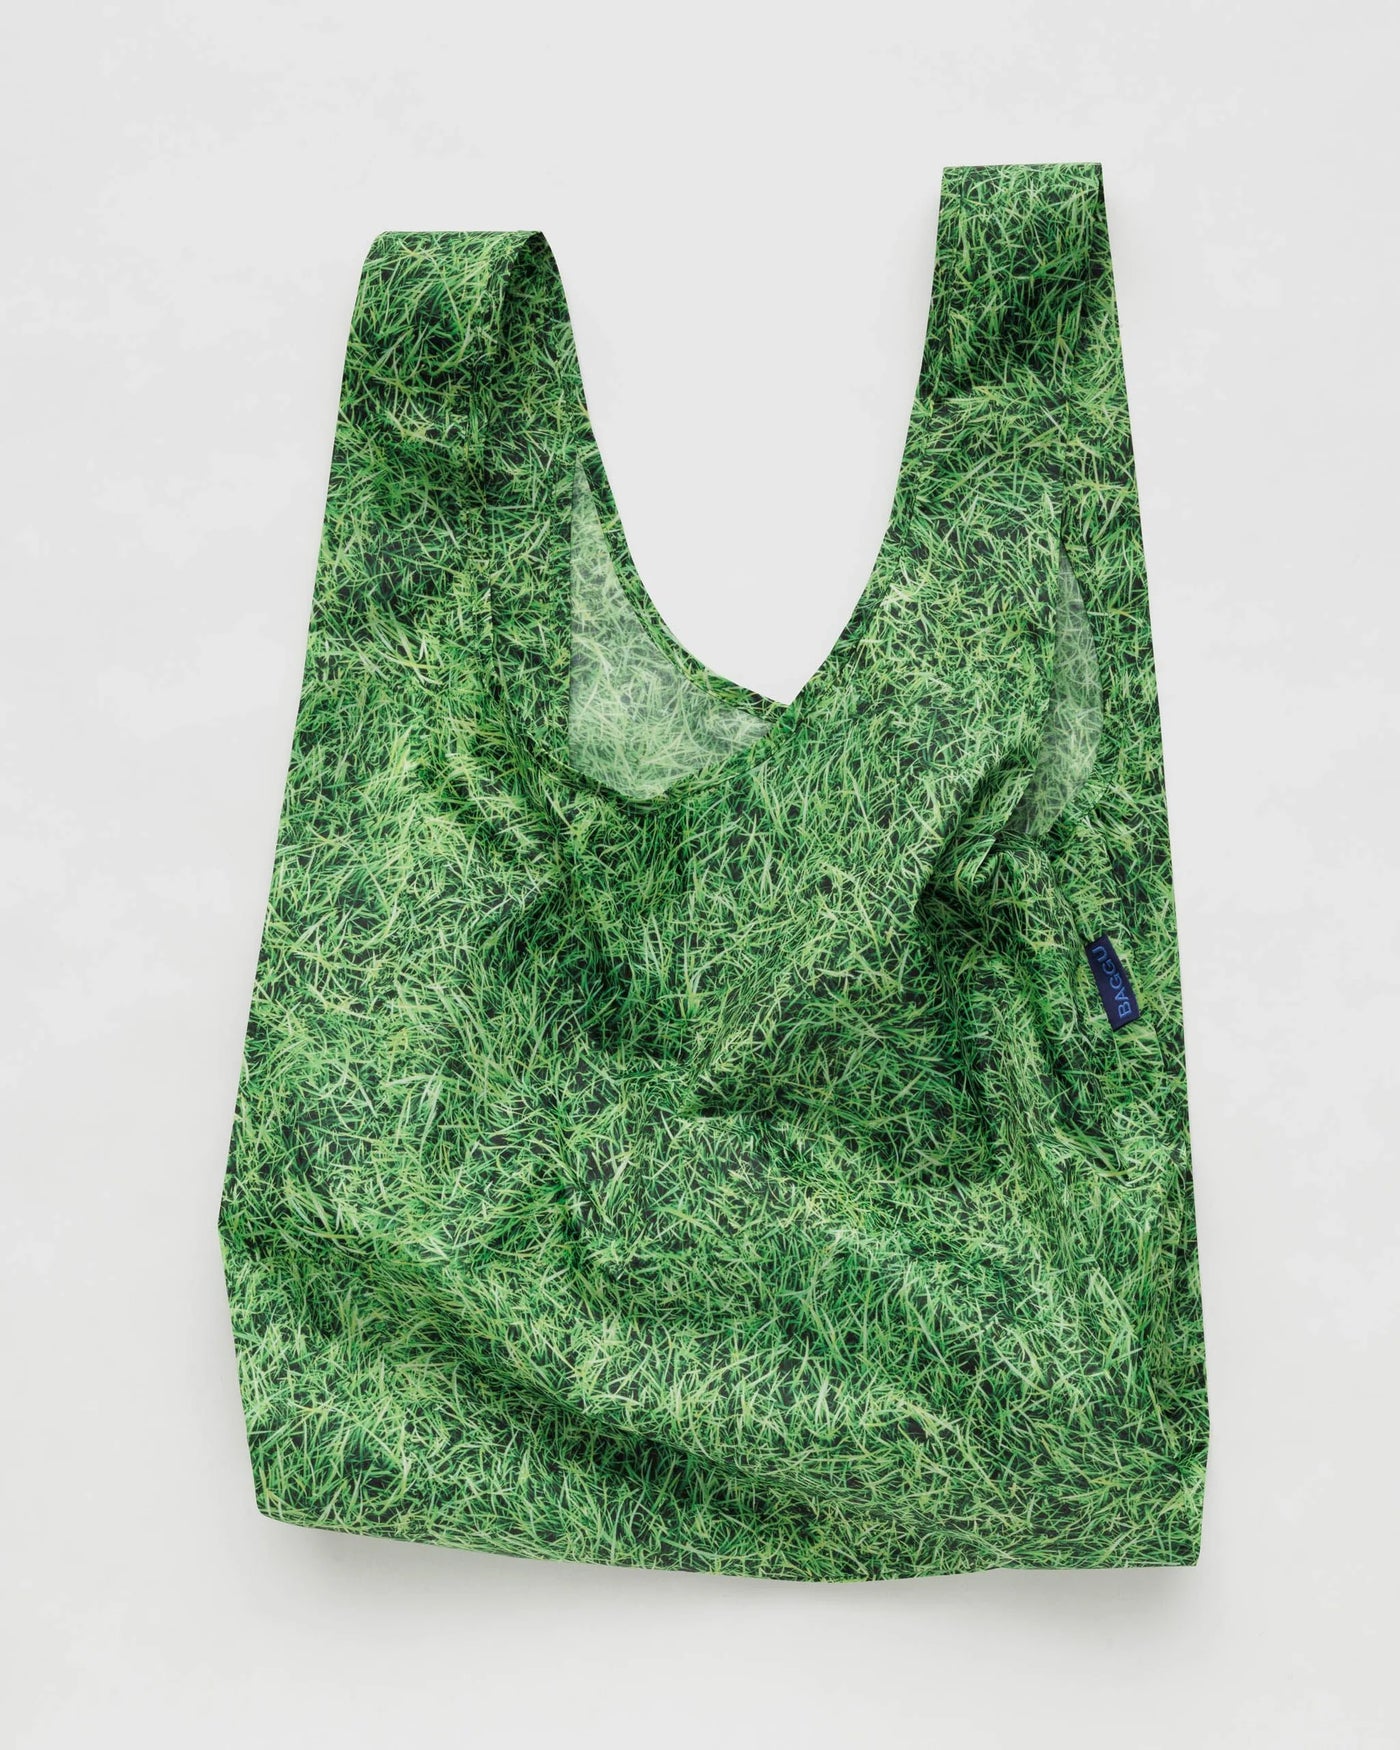 Women wearing a denim shirt and shorts and holding a green grass printed tote bag